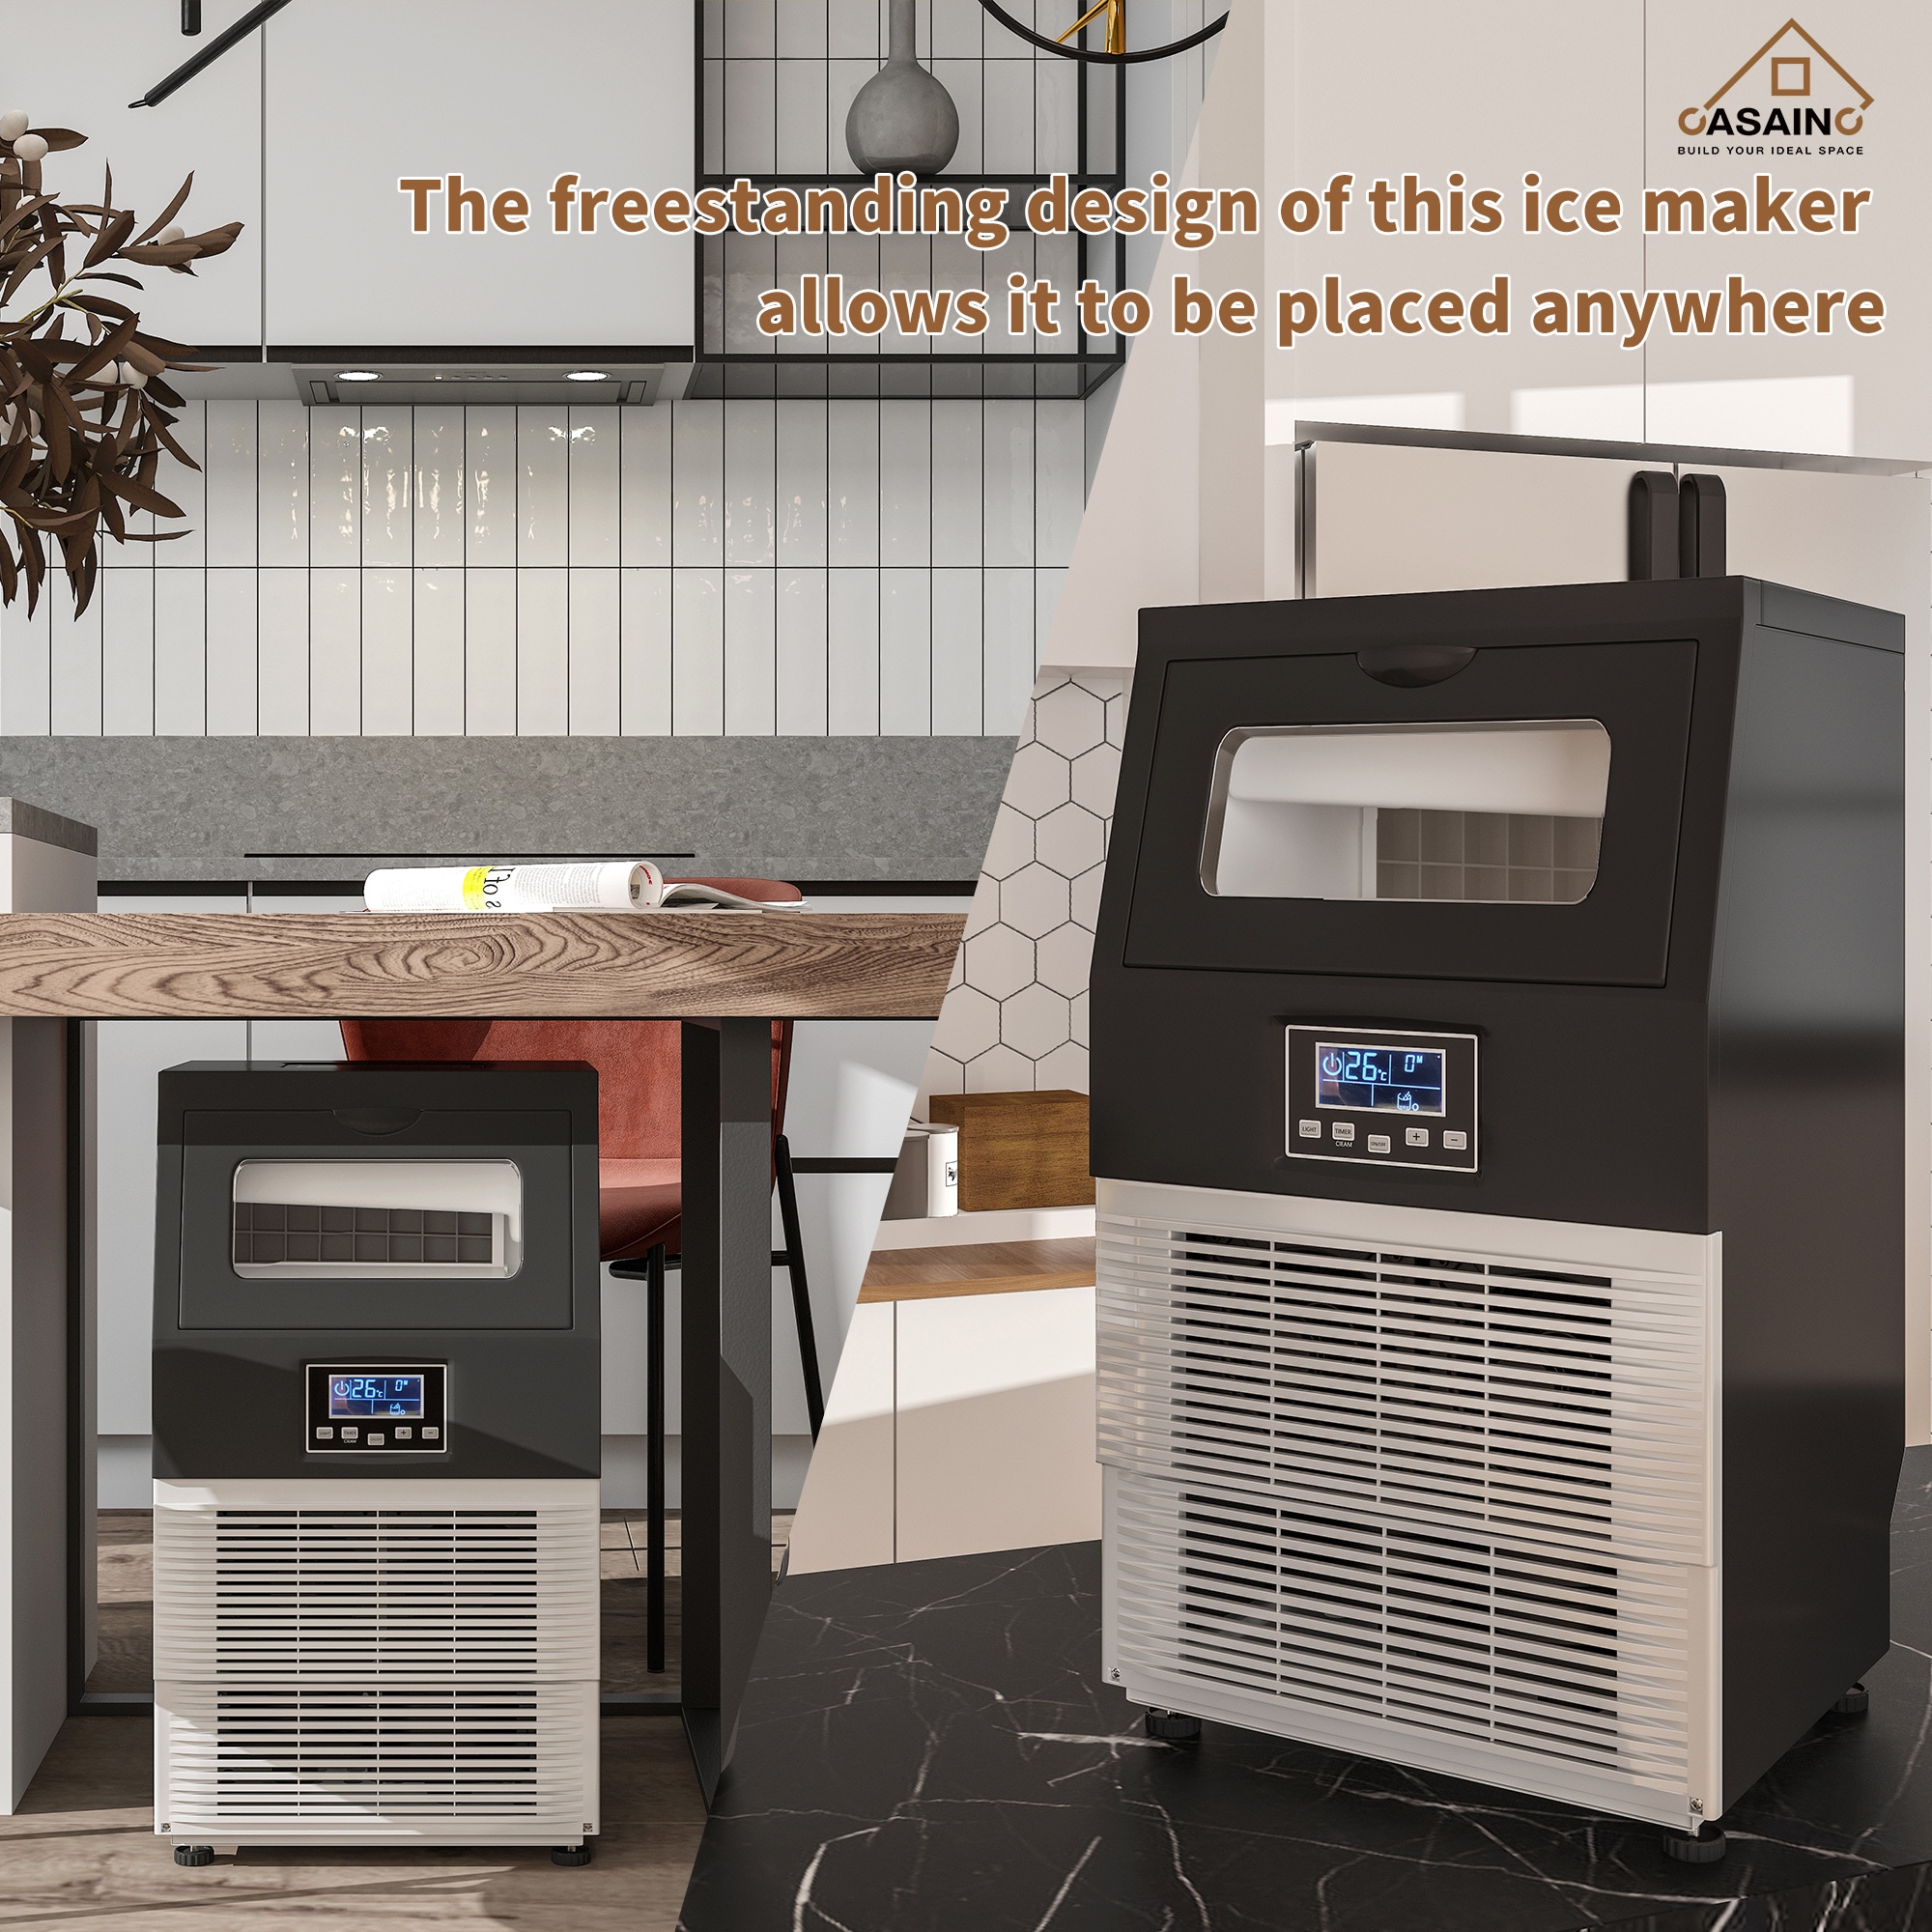 Ice Cube Makers, Commercial Ice Maker Machine,Under Counter Ice Maker with  Large Storage Bin,Fully-Automatic Freestanding Commercial Clear Cube Ice